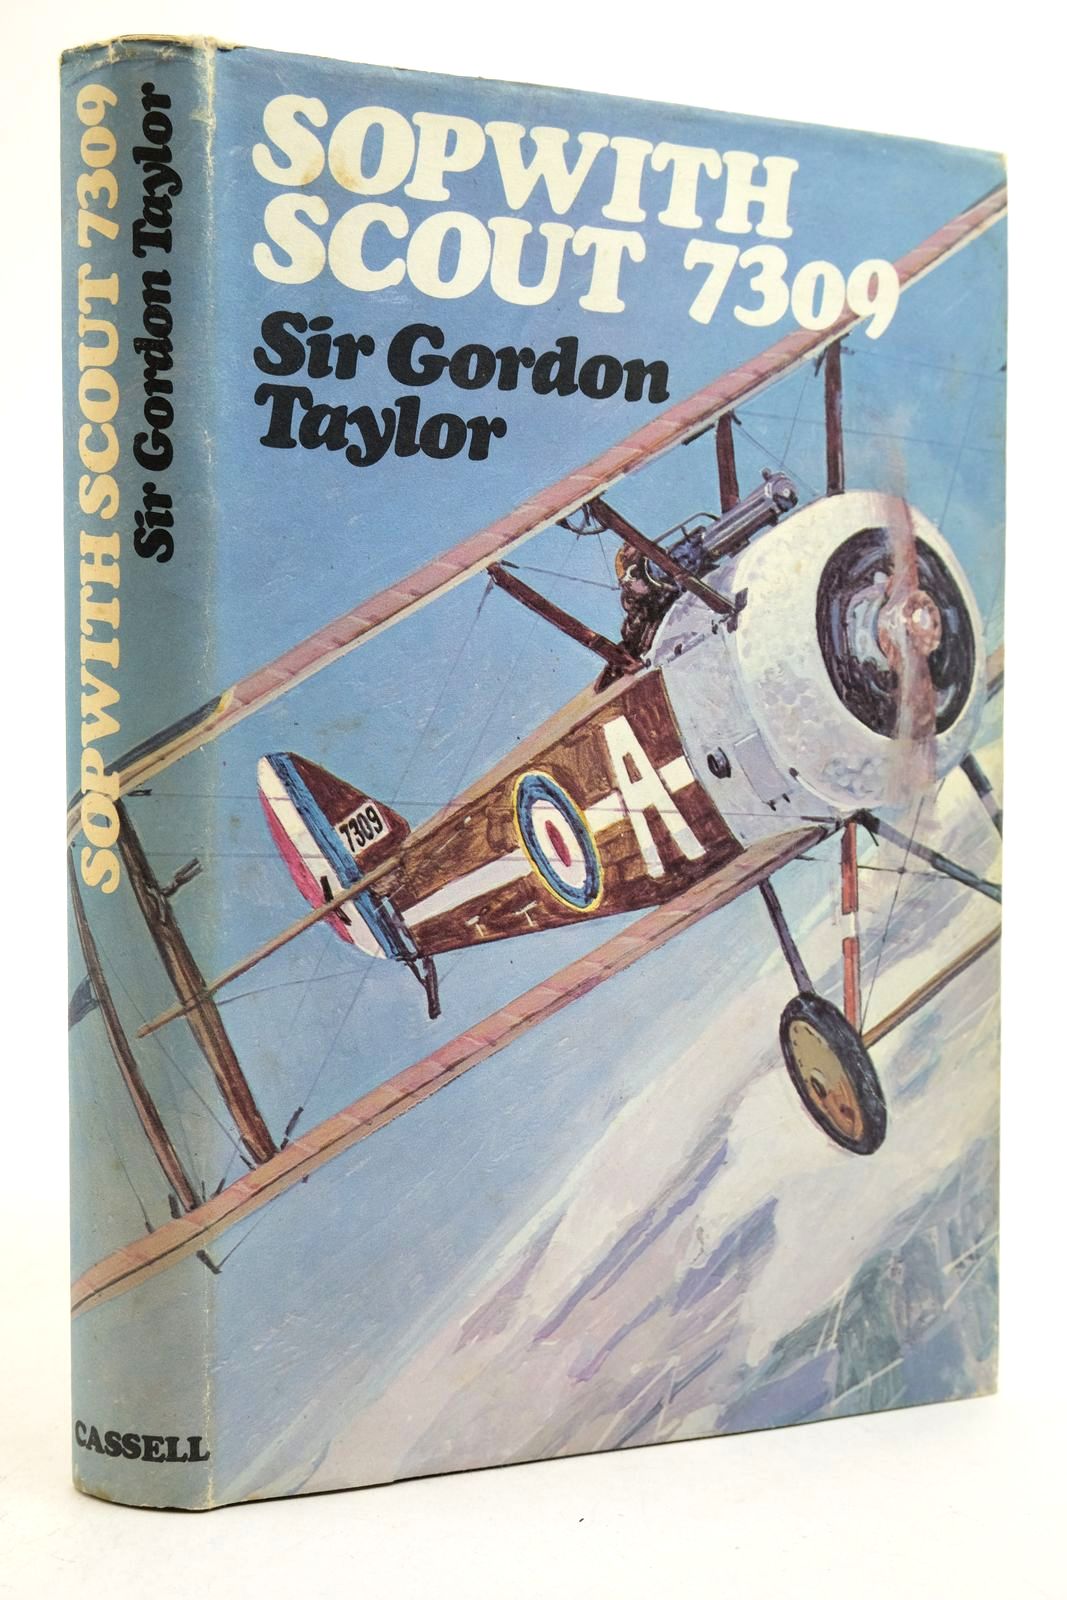 Photo of SOPWITH SCOUT 7309 written by Taylor, Gordon published by Cassell (STOCK CODE: 2140059)  for sale by Stella & Rose's Books